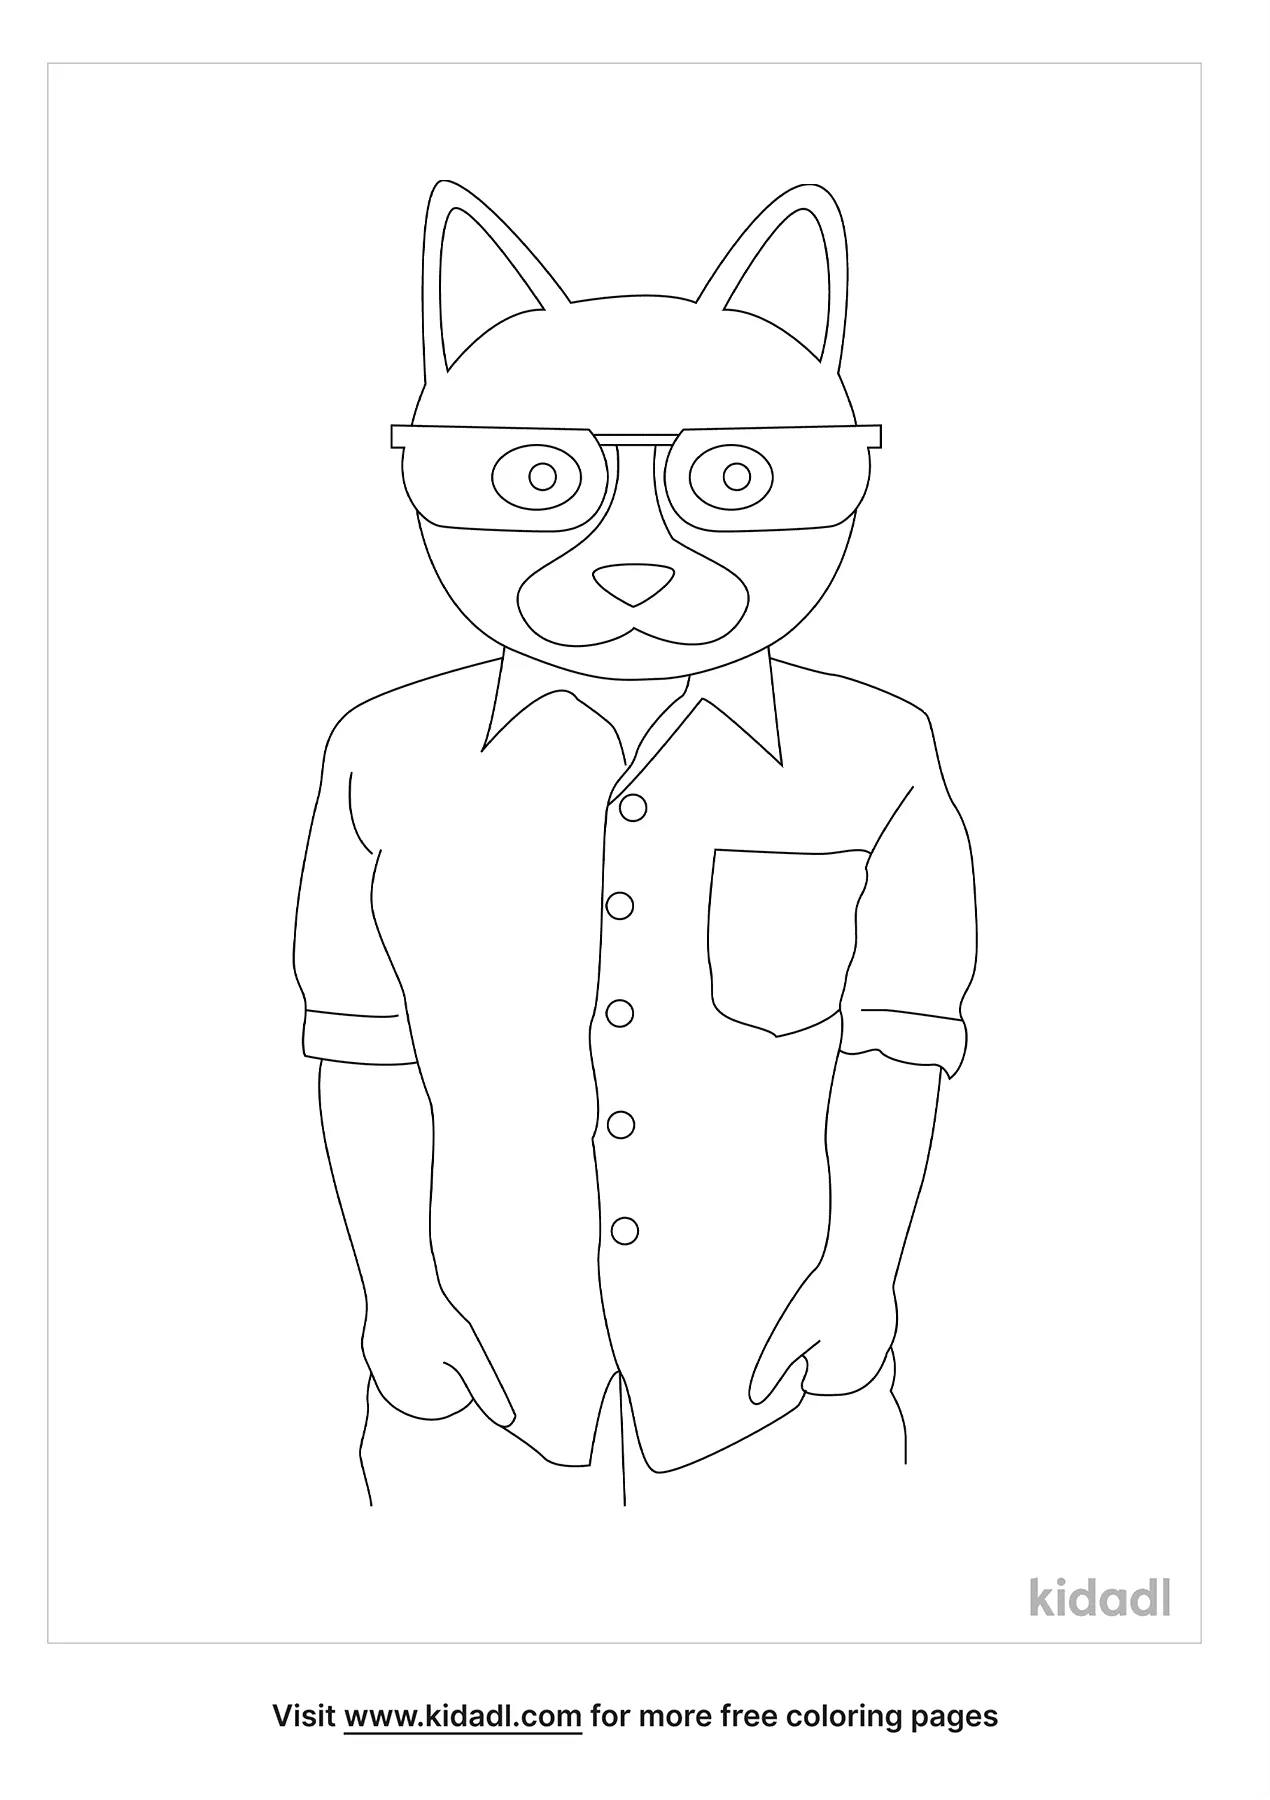 Animal Hipster Coloring Page